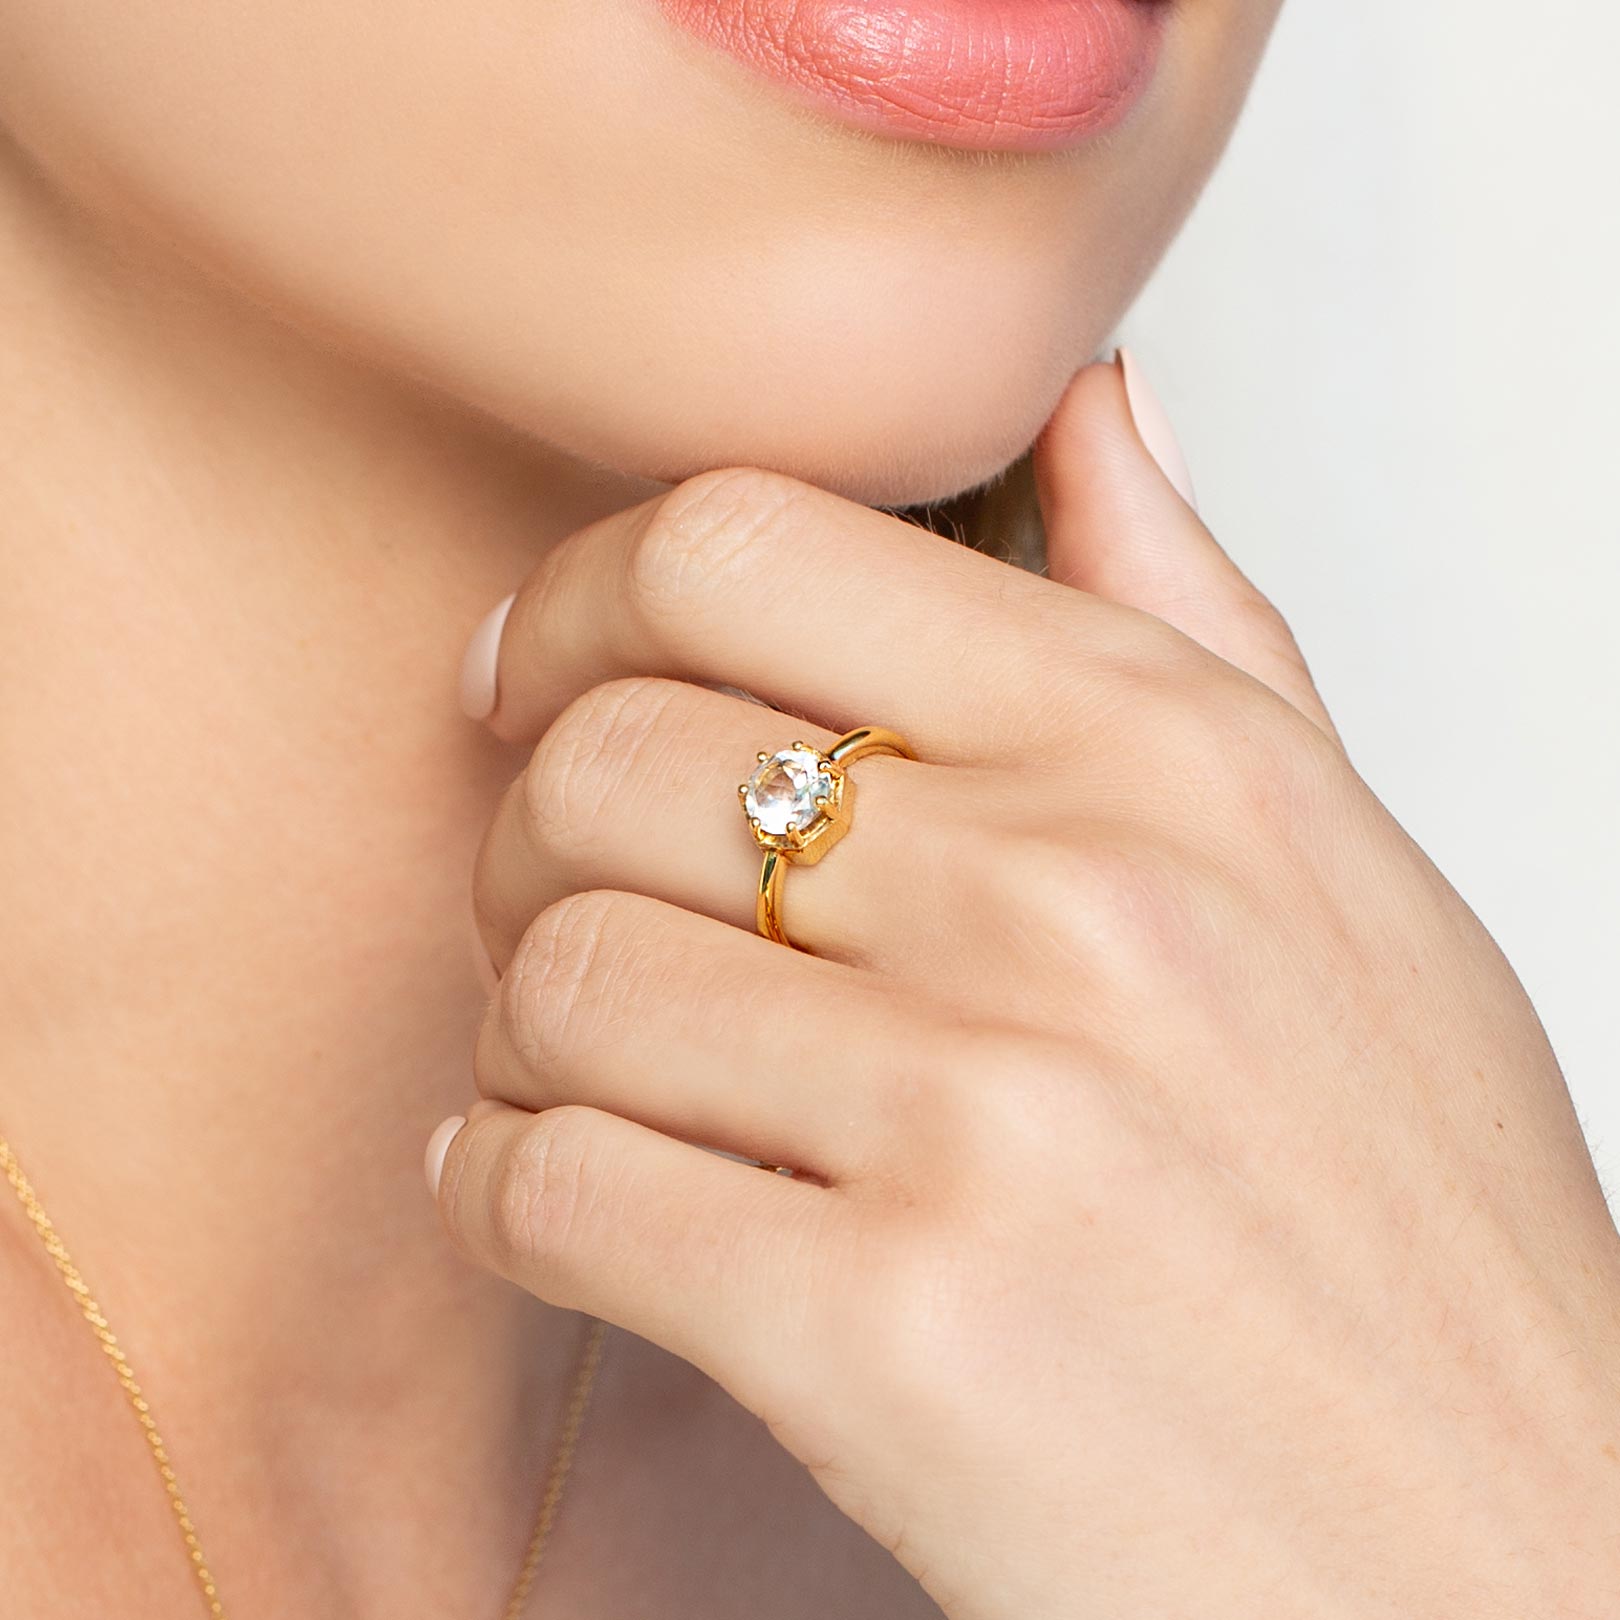 Close up of a christian woman wearing 18K gold vermeil white topaz Ebenezer Solitaire Ring from the Chispa Collection by Rizen Jewelry.